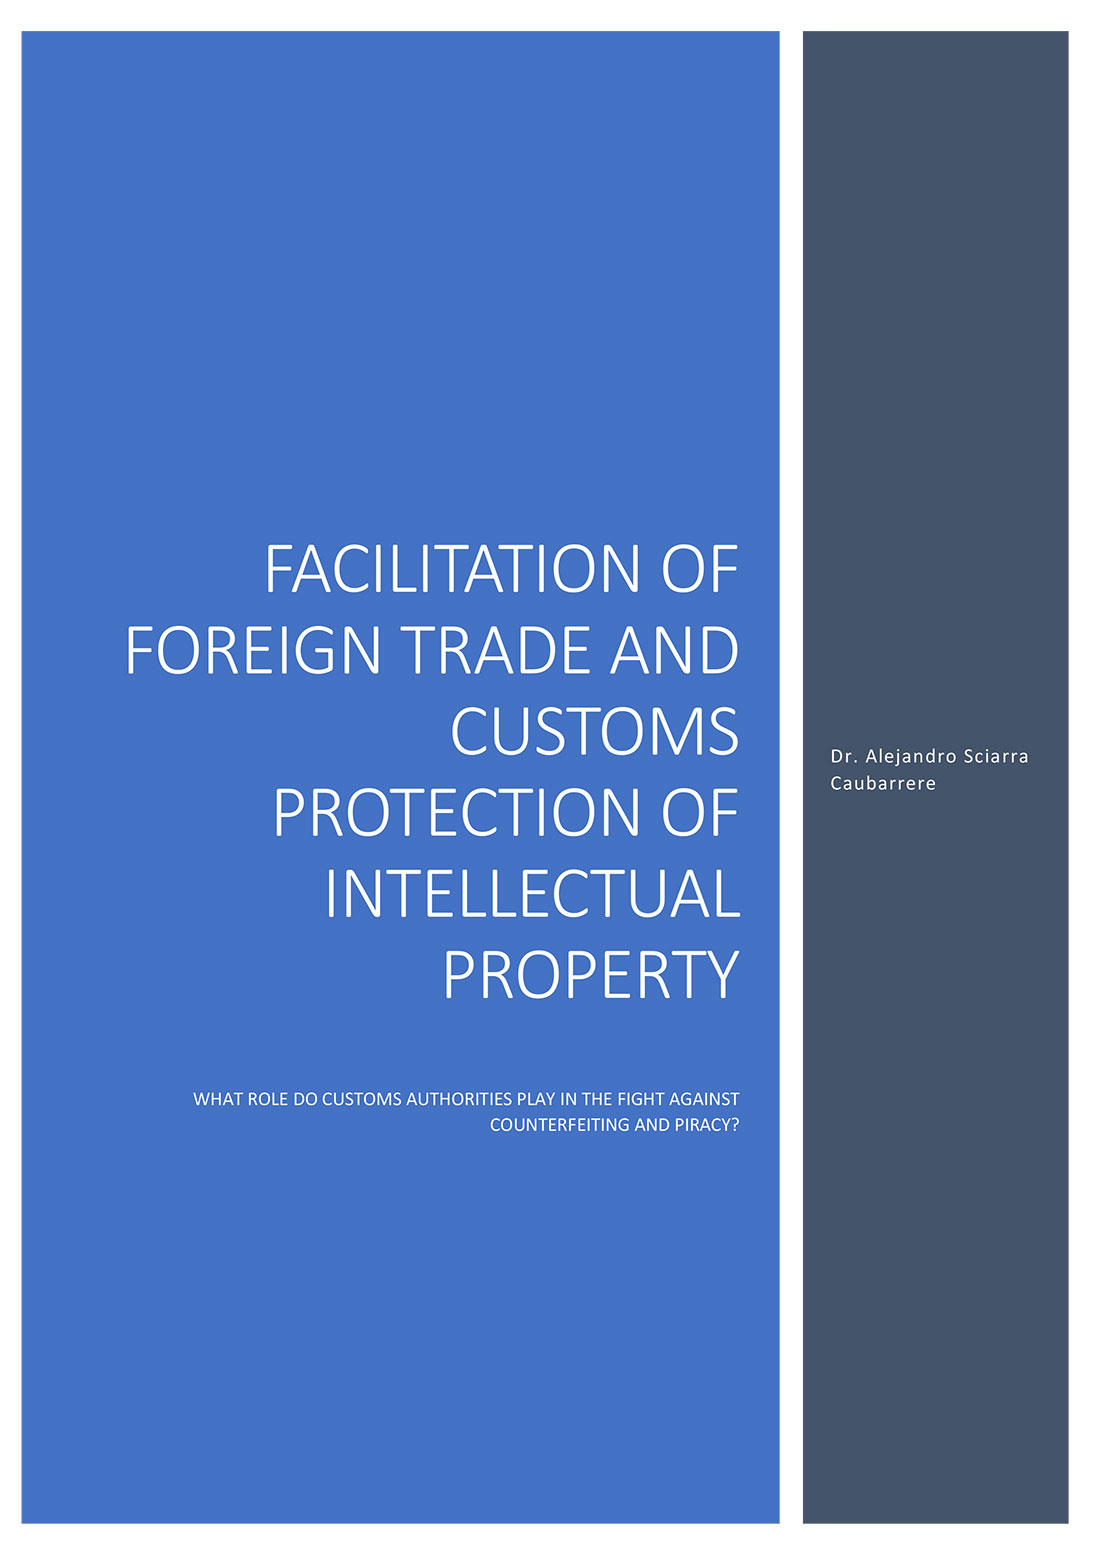 SCIARRA & ASOC FACILITATION OF FOREIGN TRADE AND CUSTOMS PROTECTION OF INTELLECTUAL PROPERTY